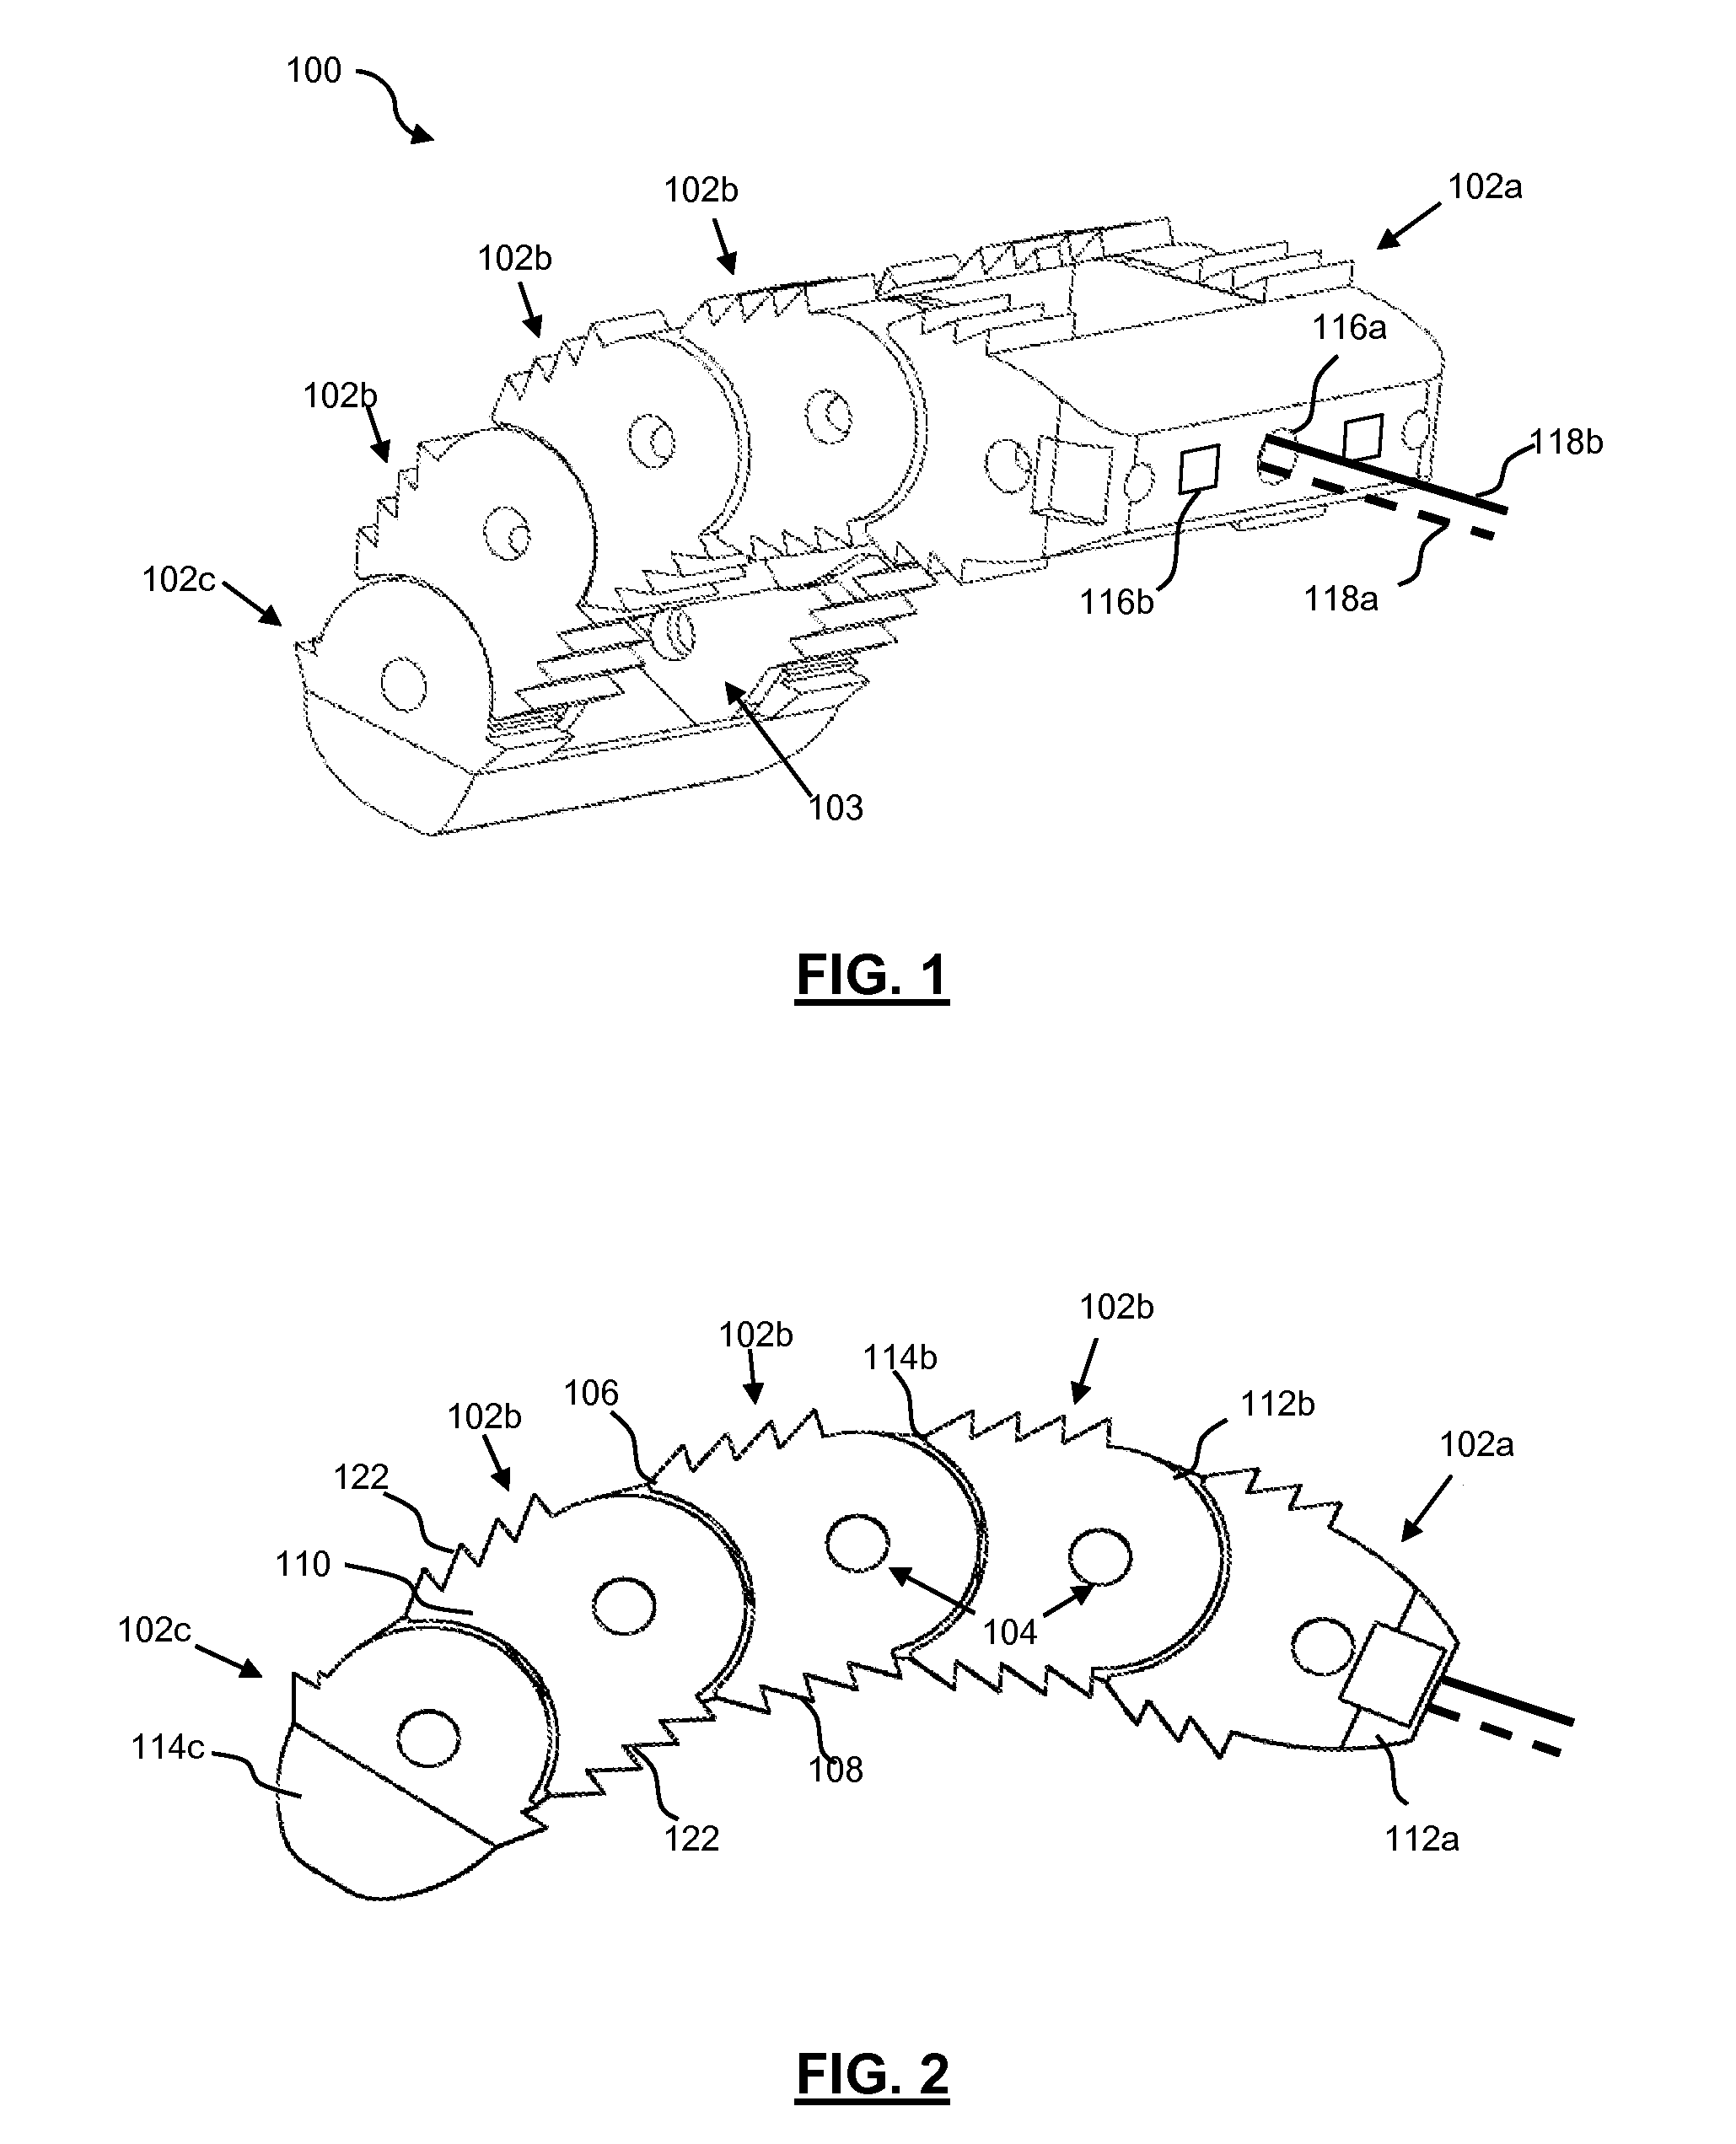 Steerable spine implant and system